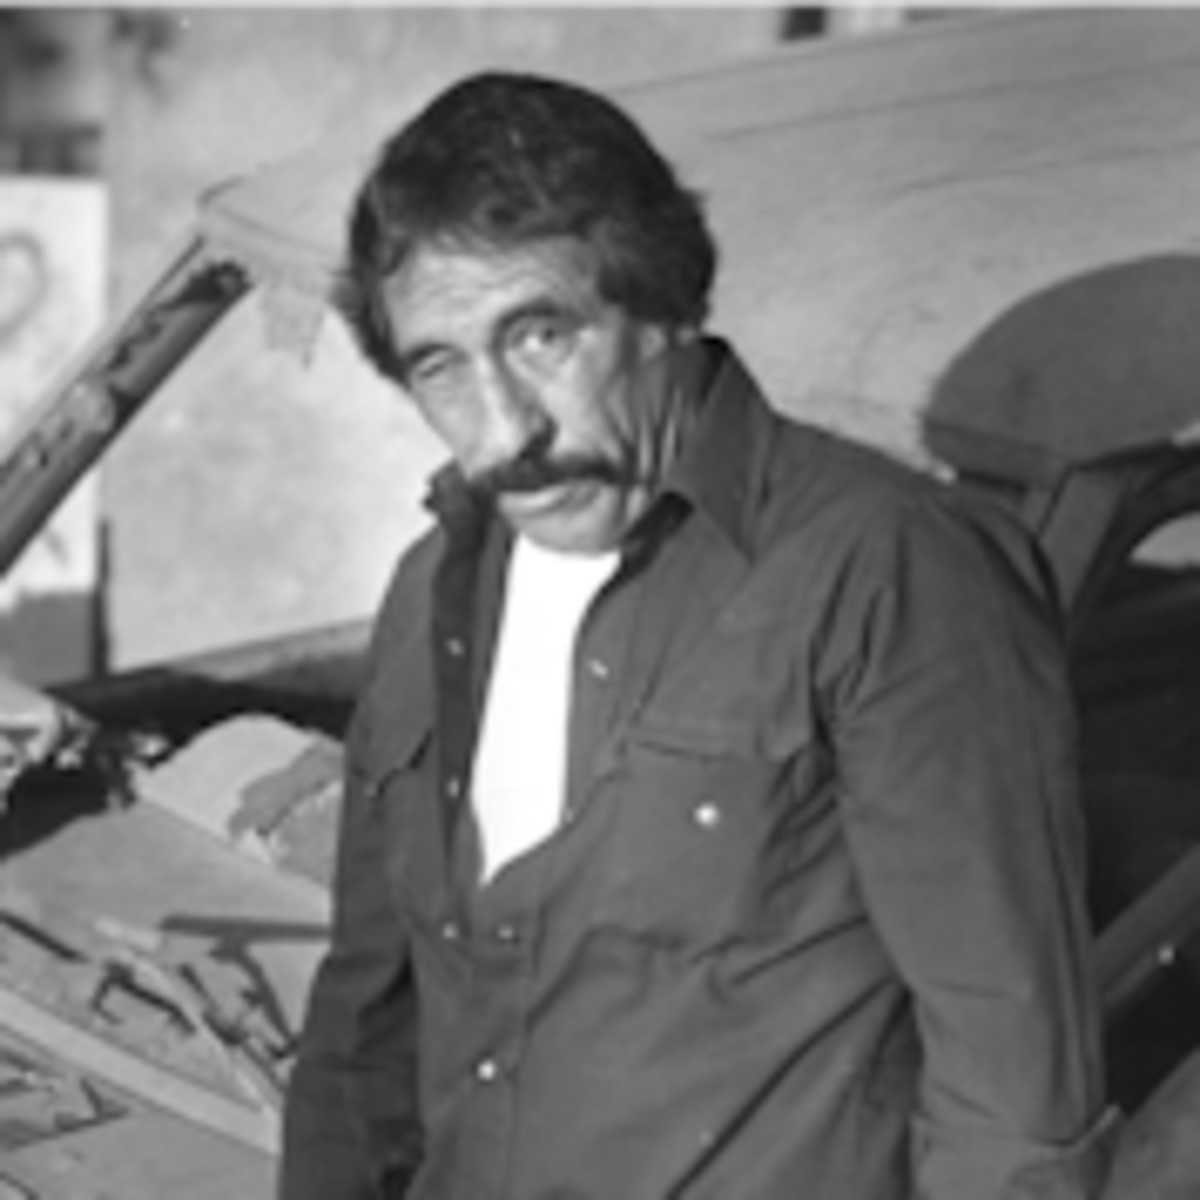 Pablo Acosta -- One of Mexico's Most Famous Drug Lords - HubPages